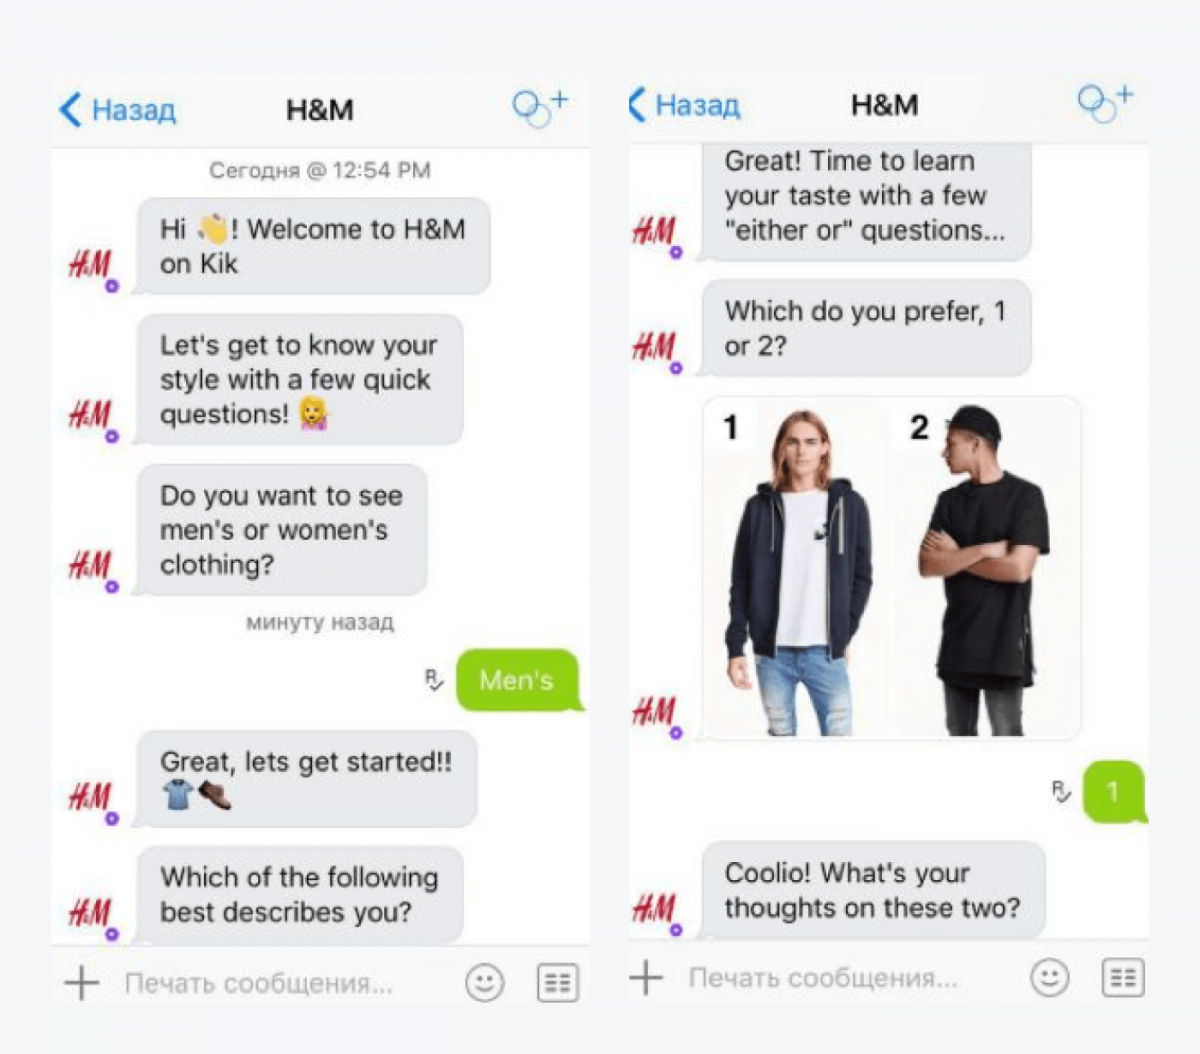 Chatbot example from H&M